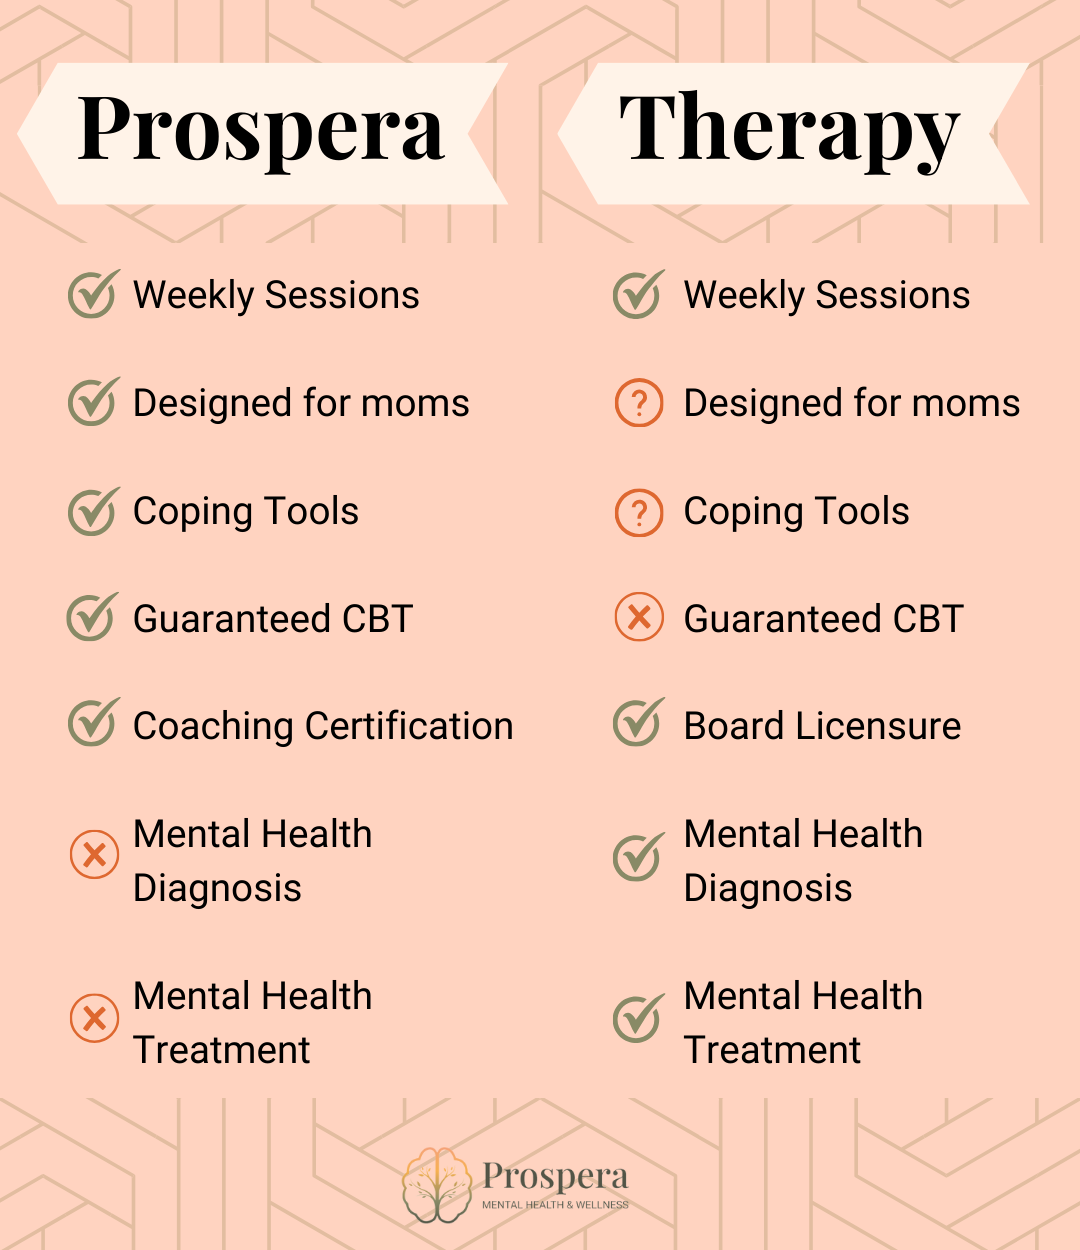 Checklist showing the difference between postpartum therapy and Prospera. Prospera has weekly coaching sessions, is focused on moms, and guarantees CBT. Therapy has weekly sessions and can include a diagnosis and treatment where coaching cannot.